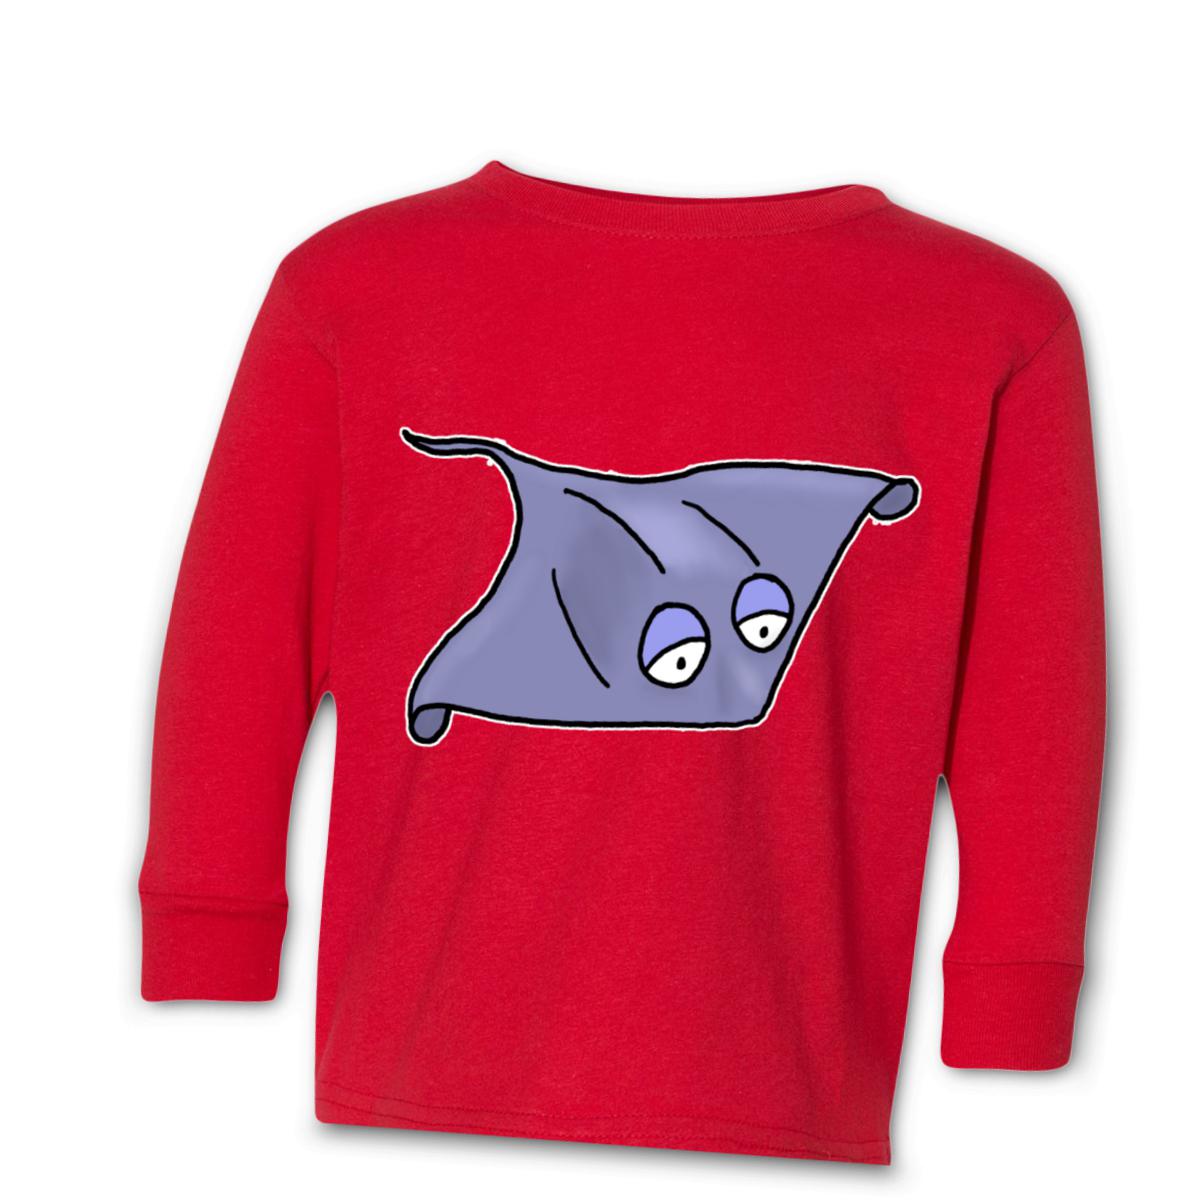 Stingray Toddler Long Sleeve Tee 4T red